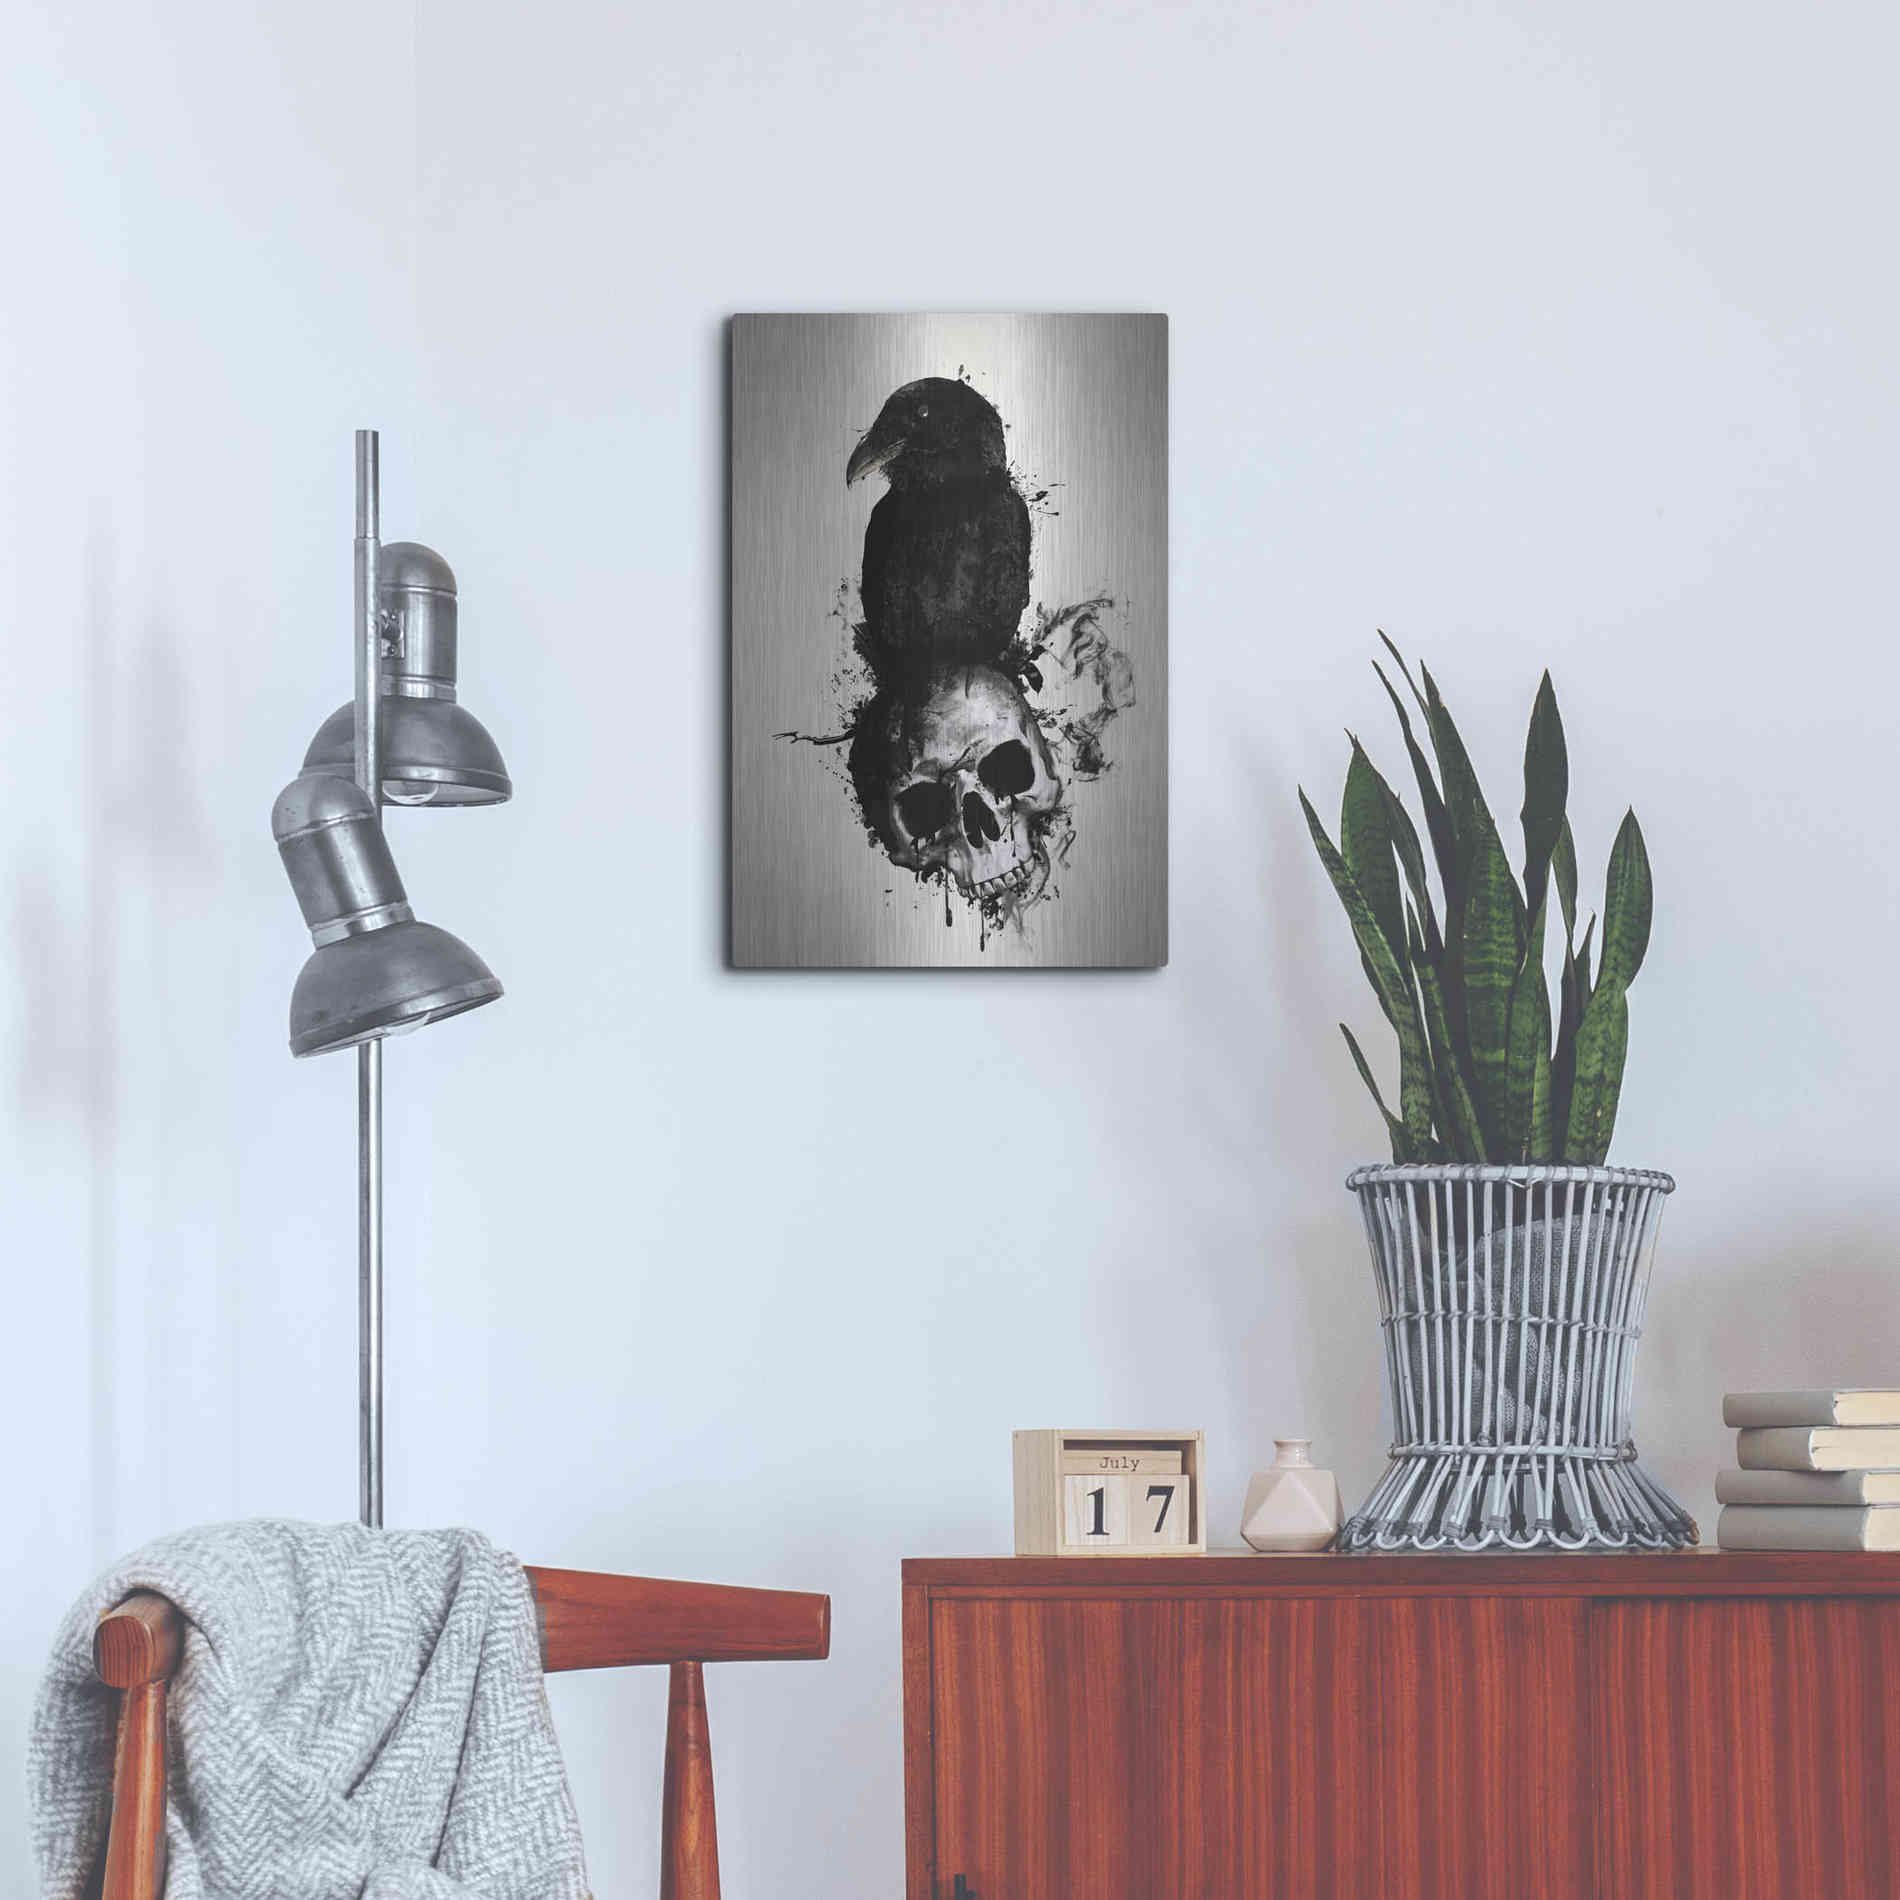 Luxe Metal Art 'Raven and Skull' by Nicklas Gustafsson, Metal Wall Art,16x24